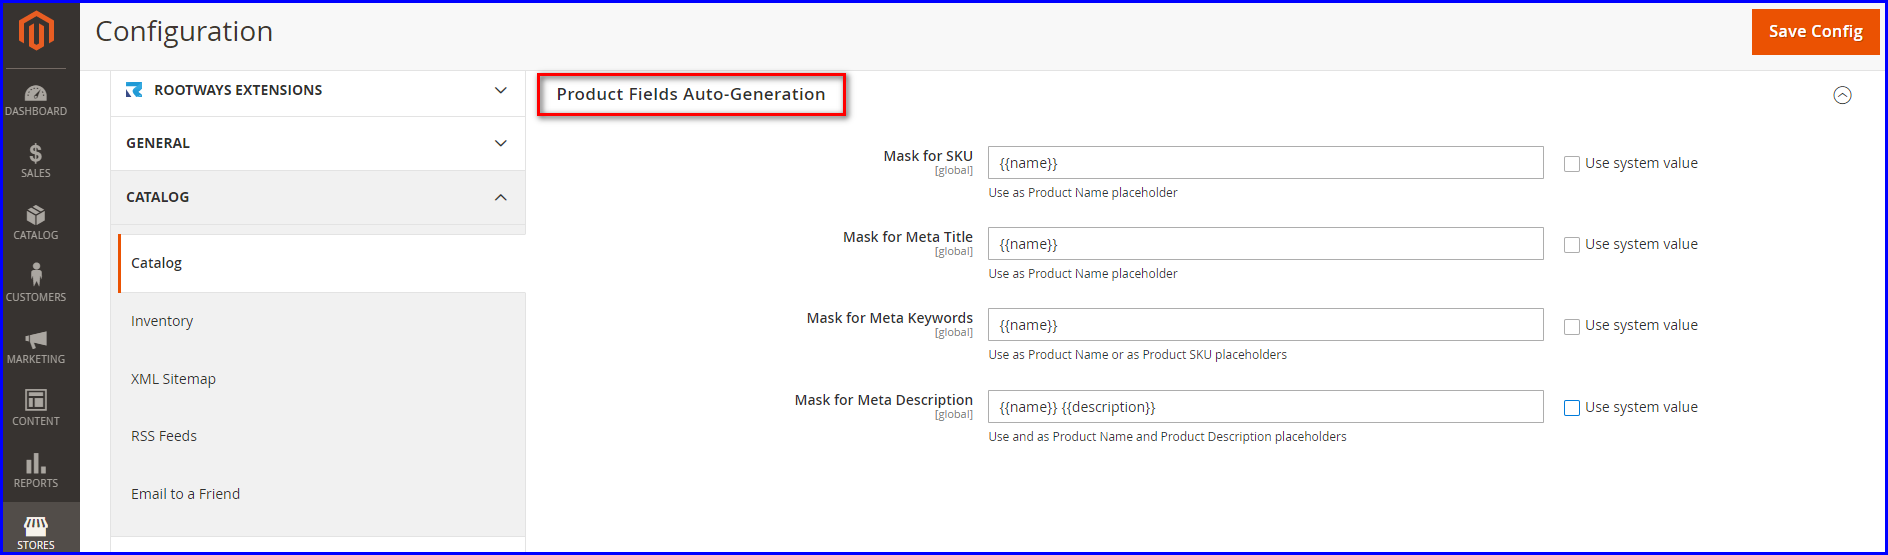 How to set product Fields Auto-Generation in Magento 2